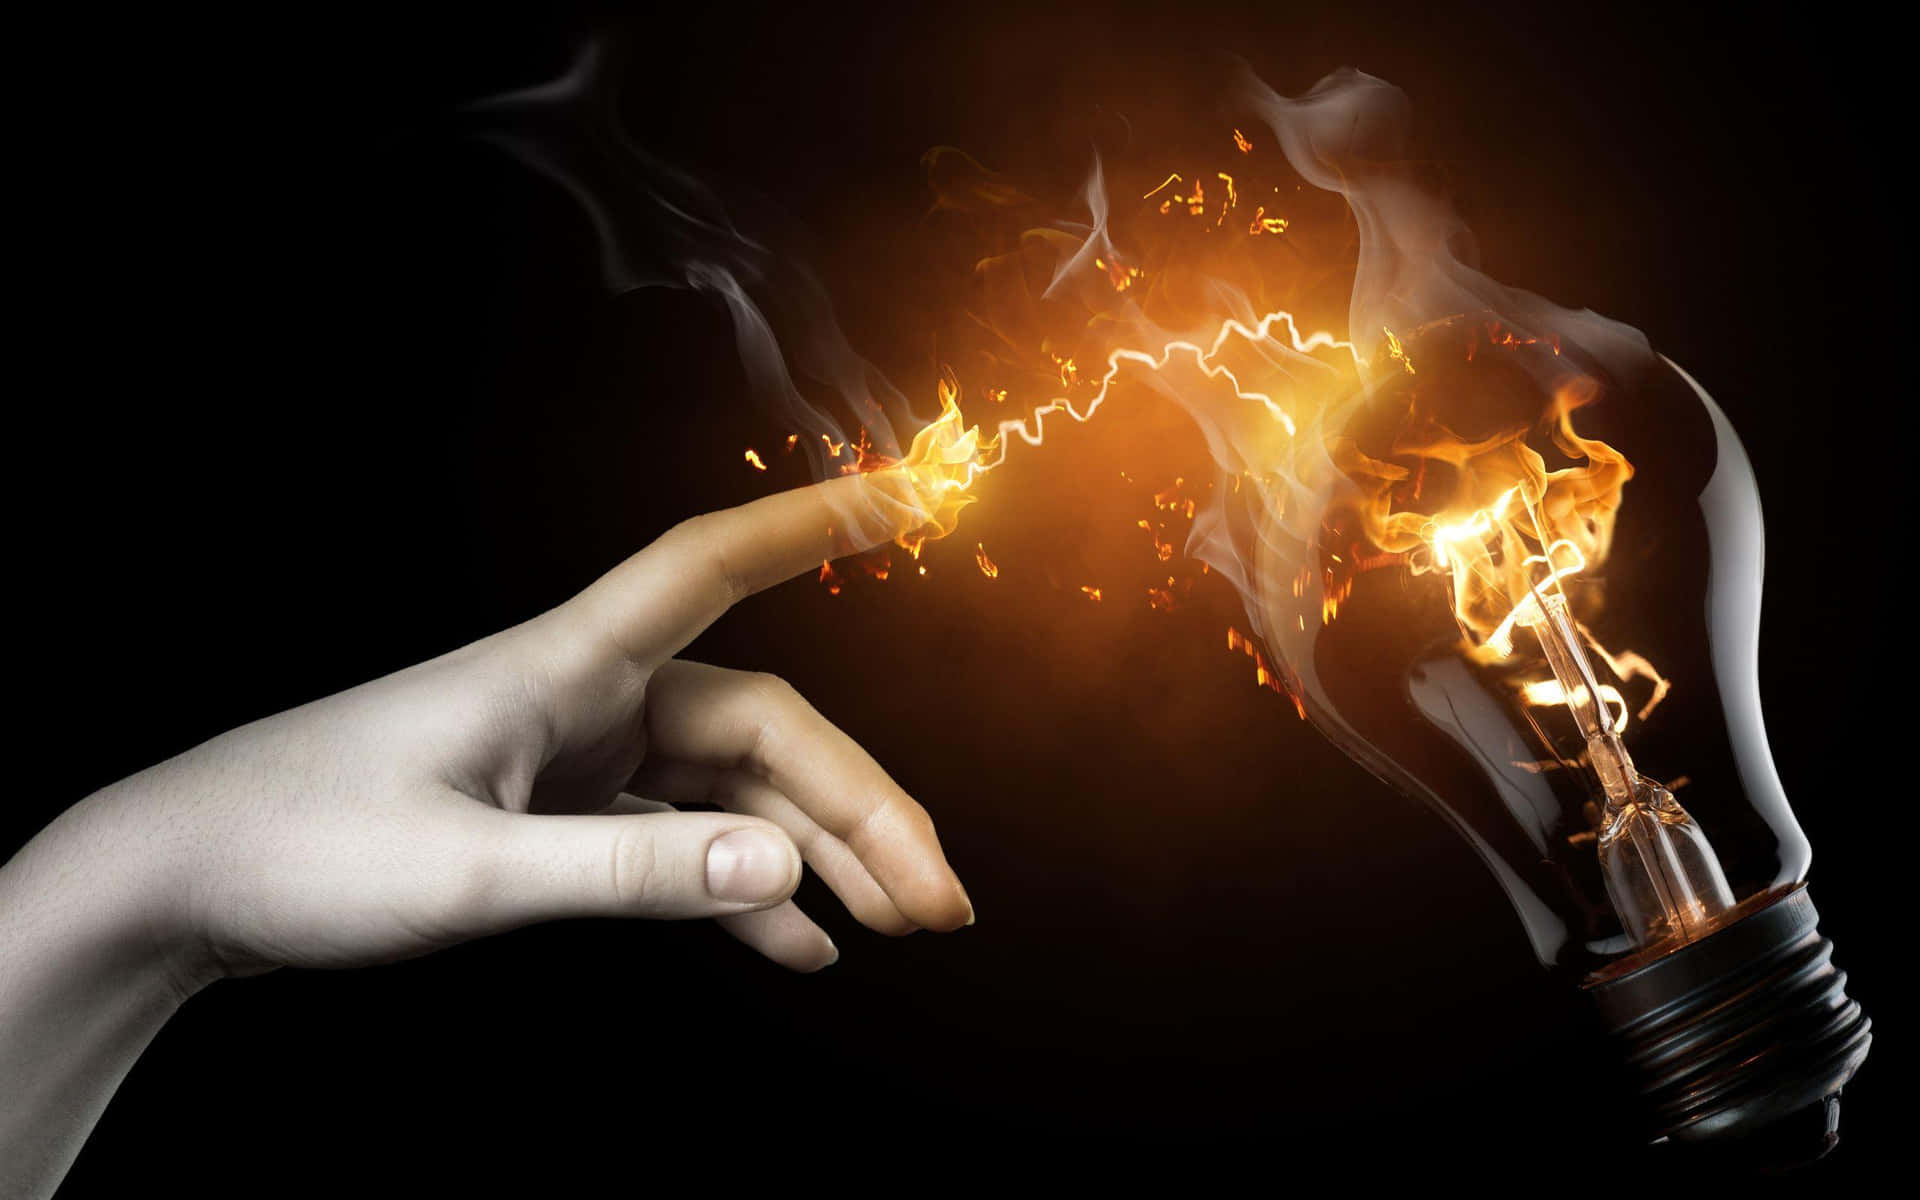 A Hand Is Touching A Light Bulb With Fire Coming Out Of It